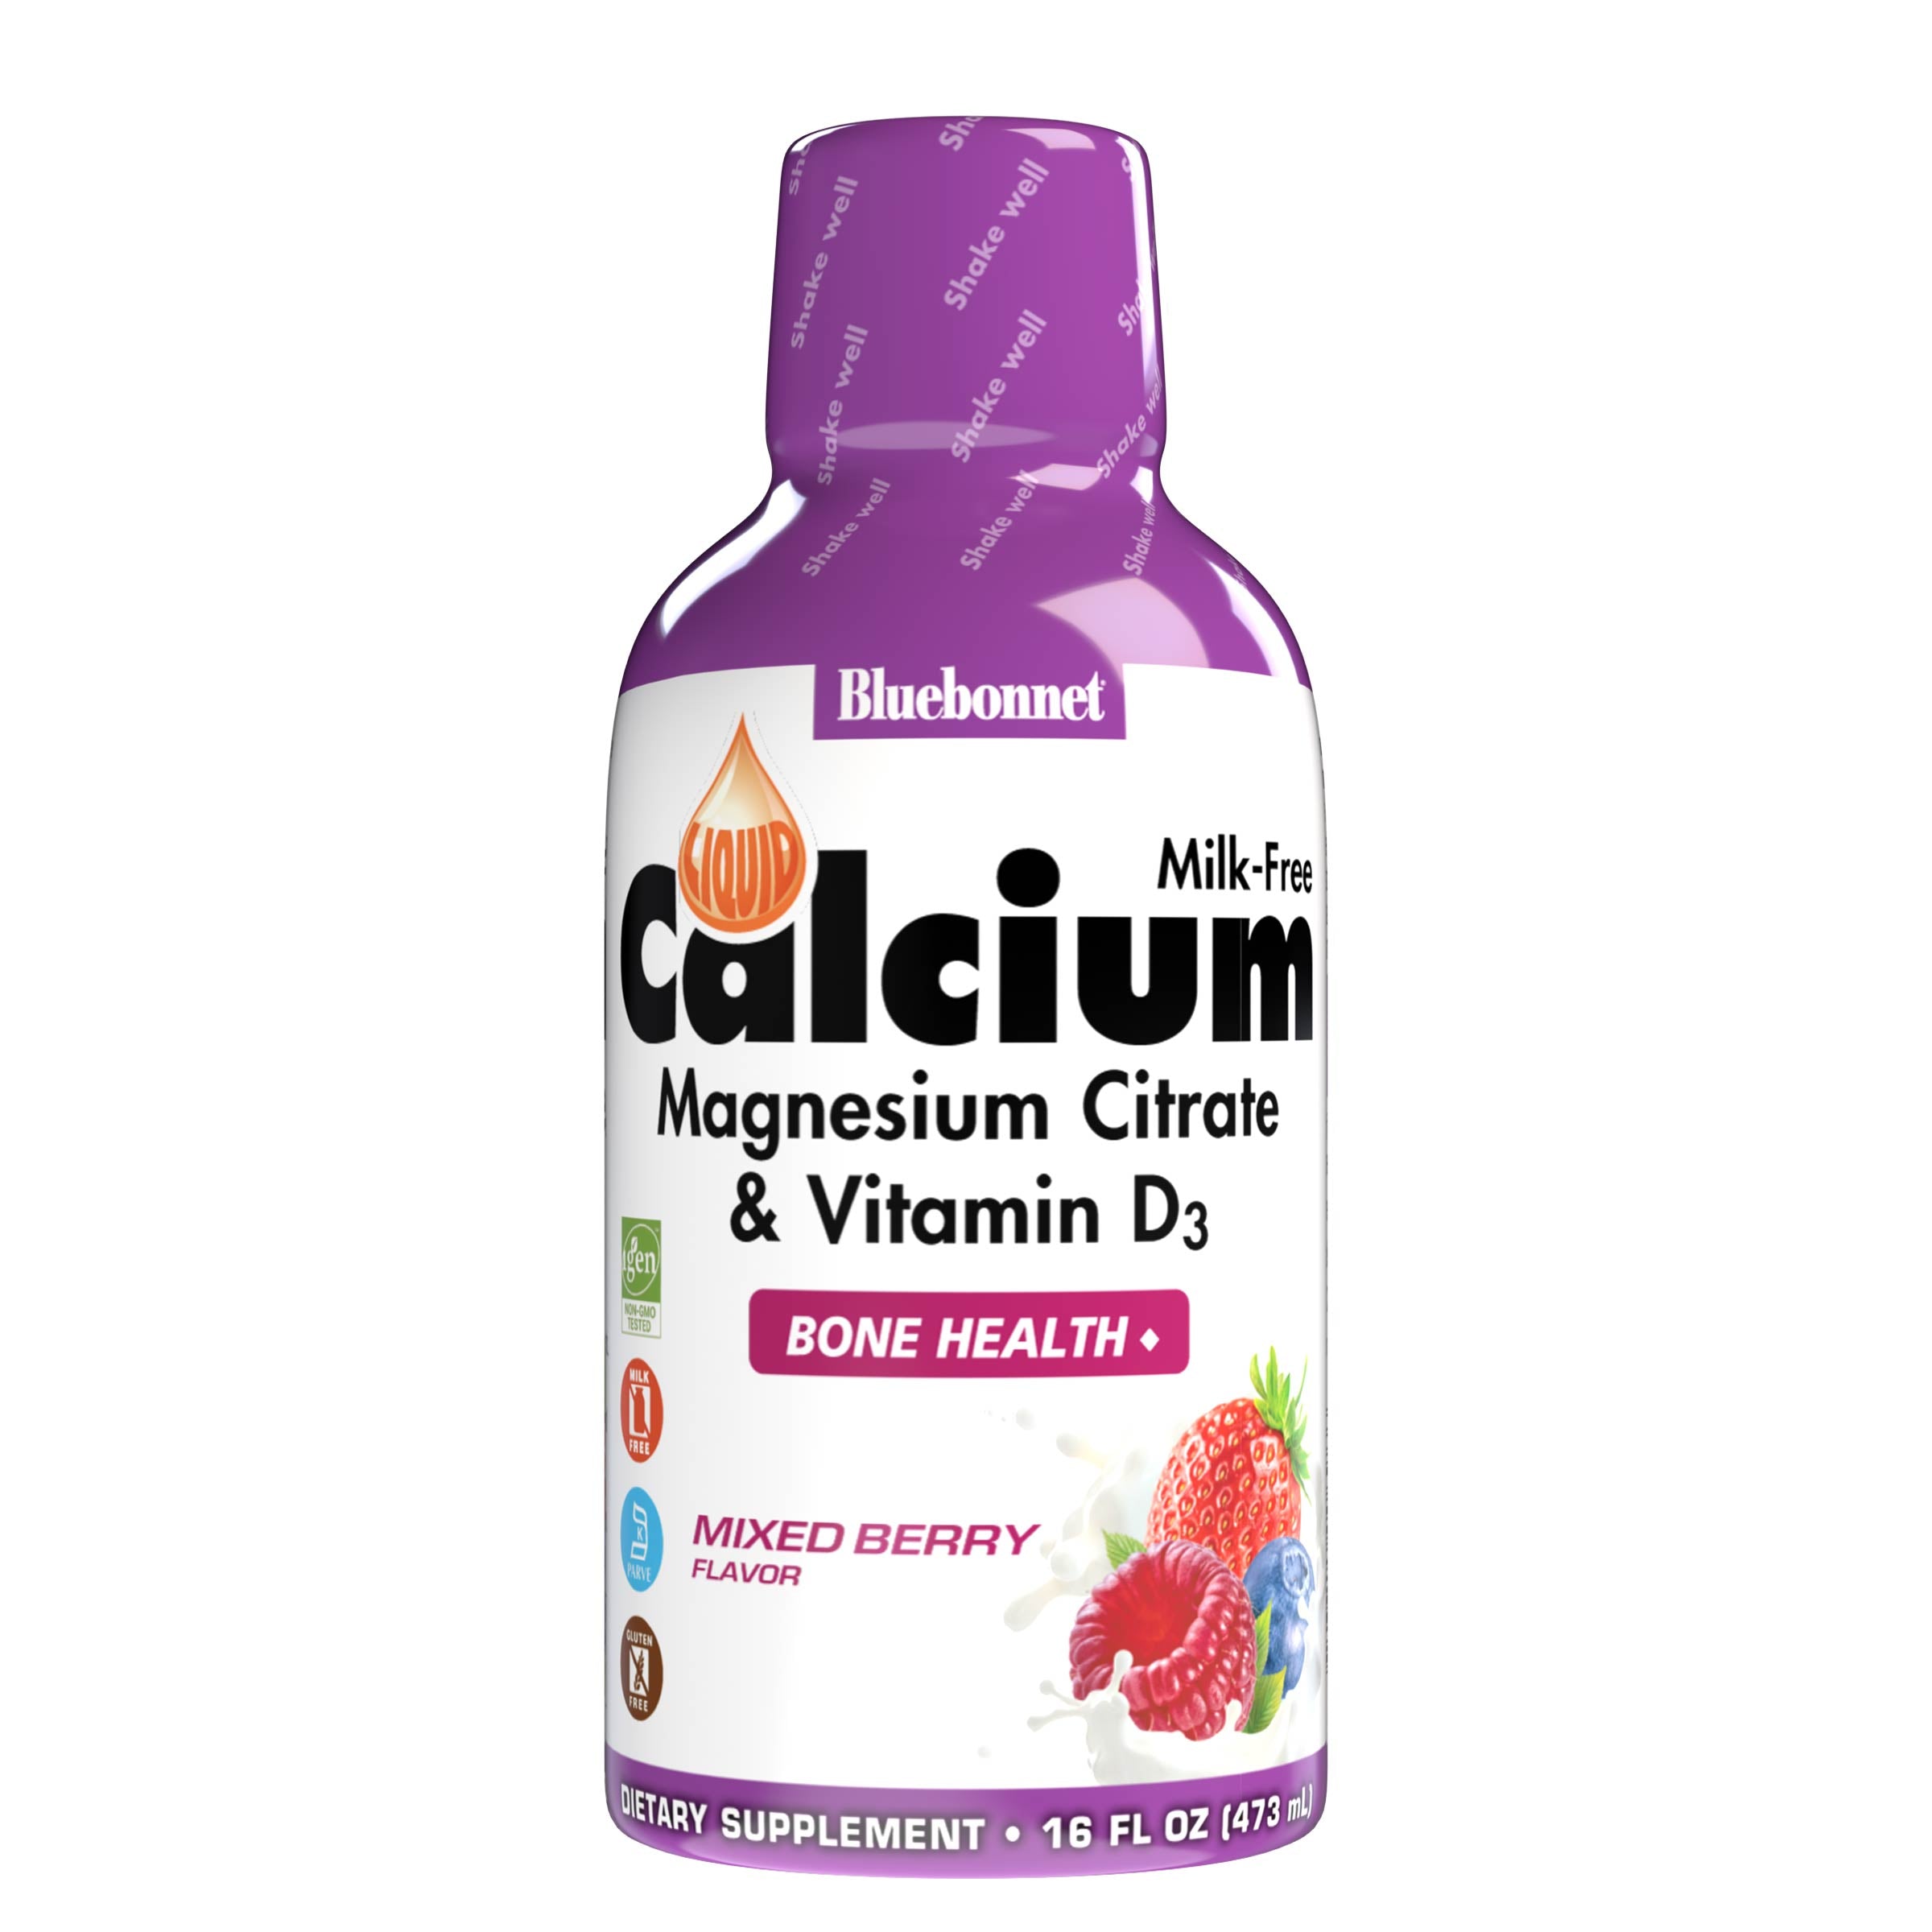 Bluebonnet's Liquid Calcium Magnesium Citrate with Vitamin D3 are formulated with calcium in a chelate of calcium citrate, as well as magnesium in a chelate of magnesium citrate and magnesium aspartate in a delicious mixed berry flavor. Plus, this formula are formulated with vitamin D3 (cholecalciferol) from lanolin for strong healthy bones. #flavor_mixed berry